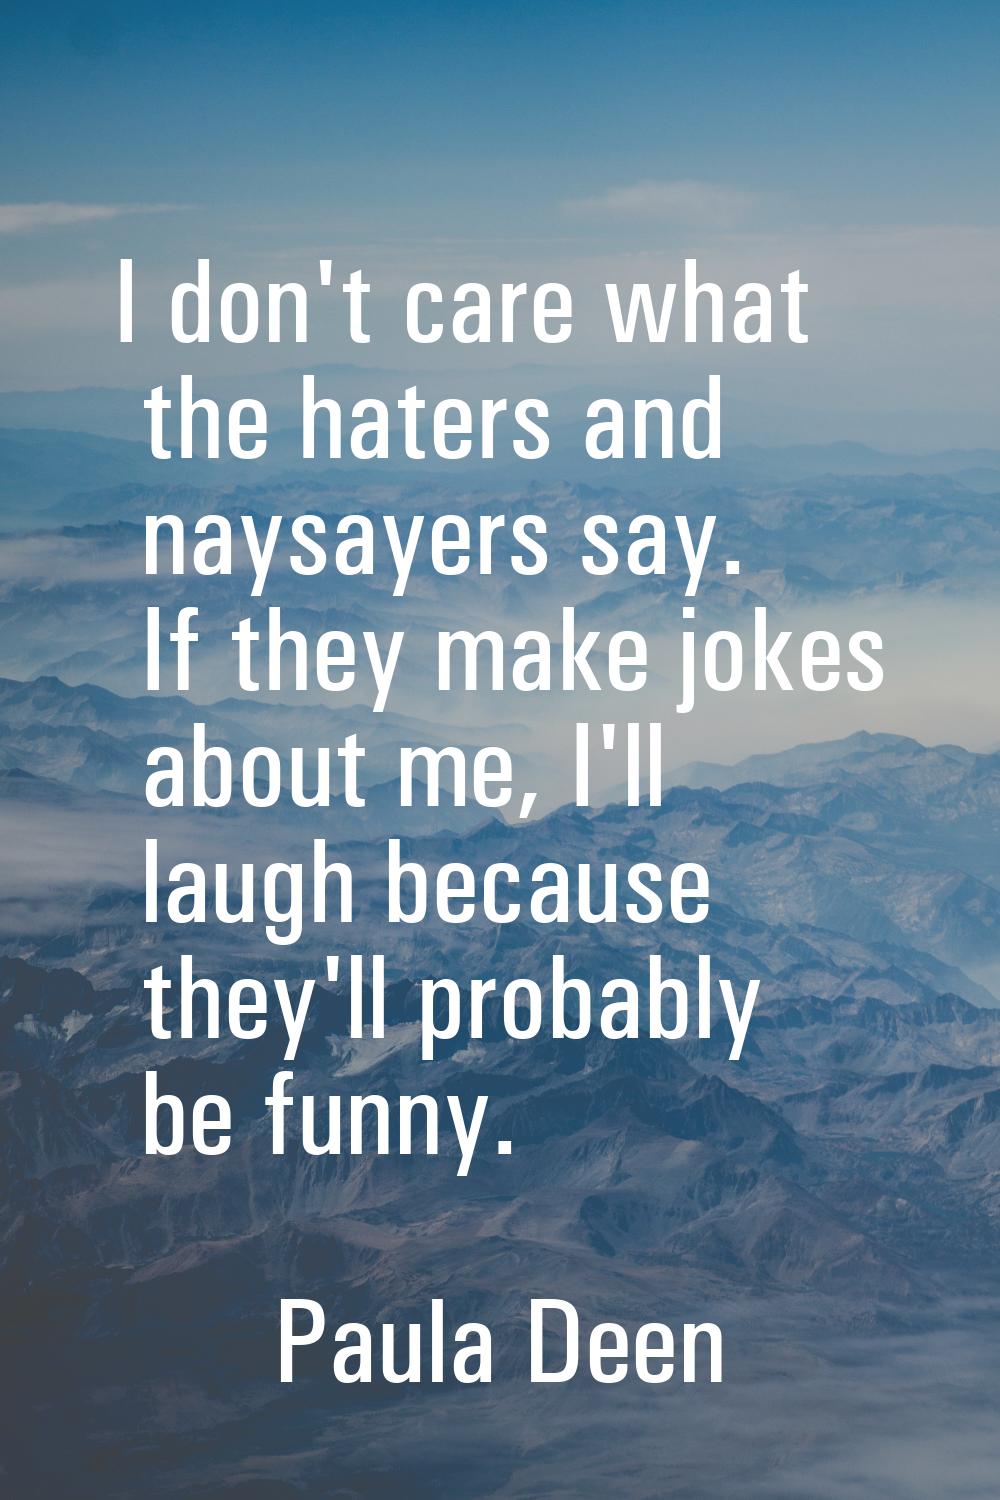 I don't care what the haters and naysayers say. If they make jokes about me, I'll laugh because the